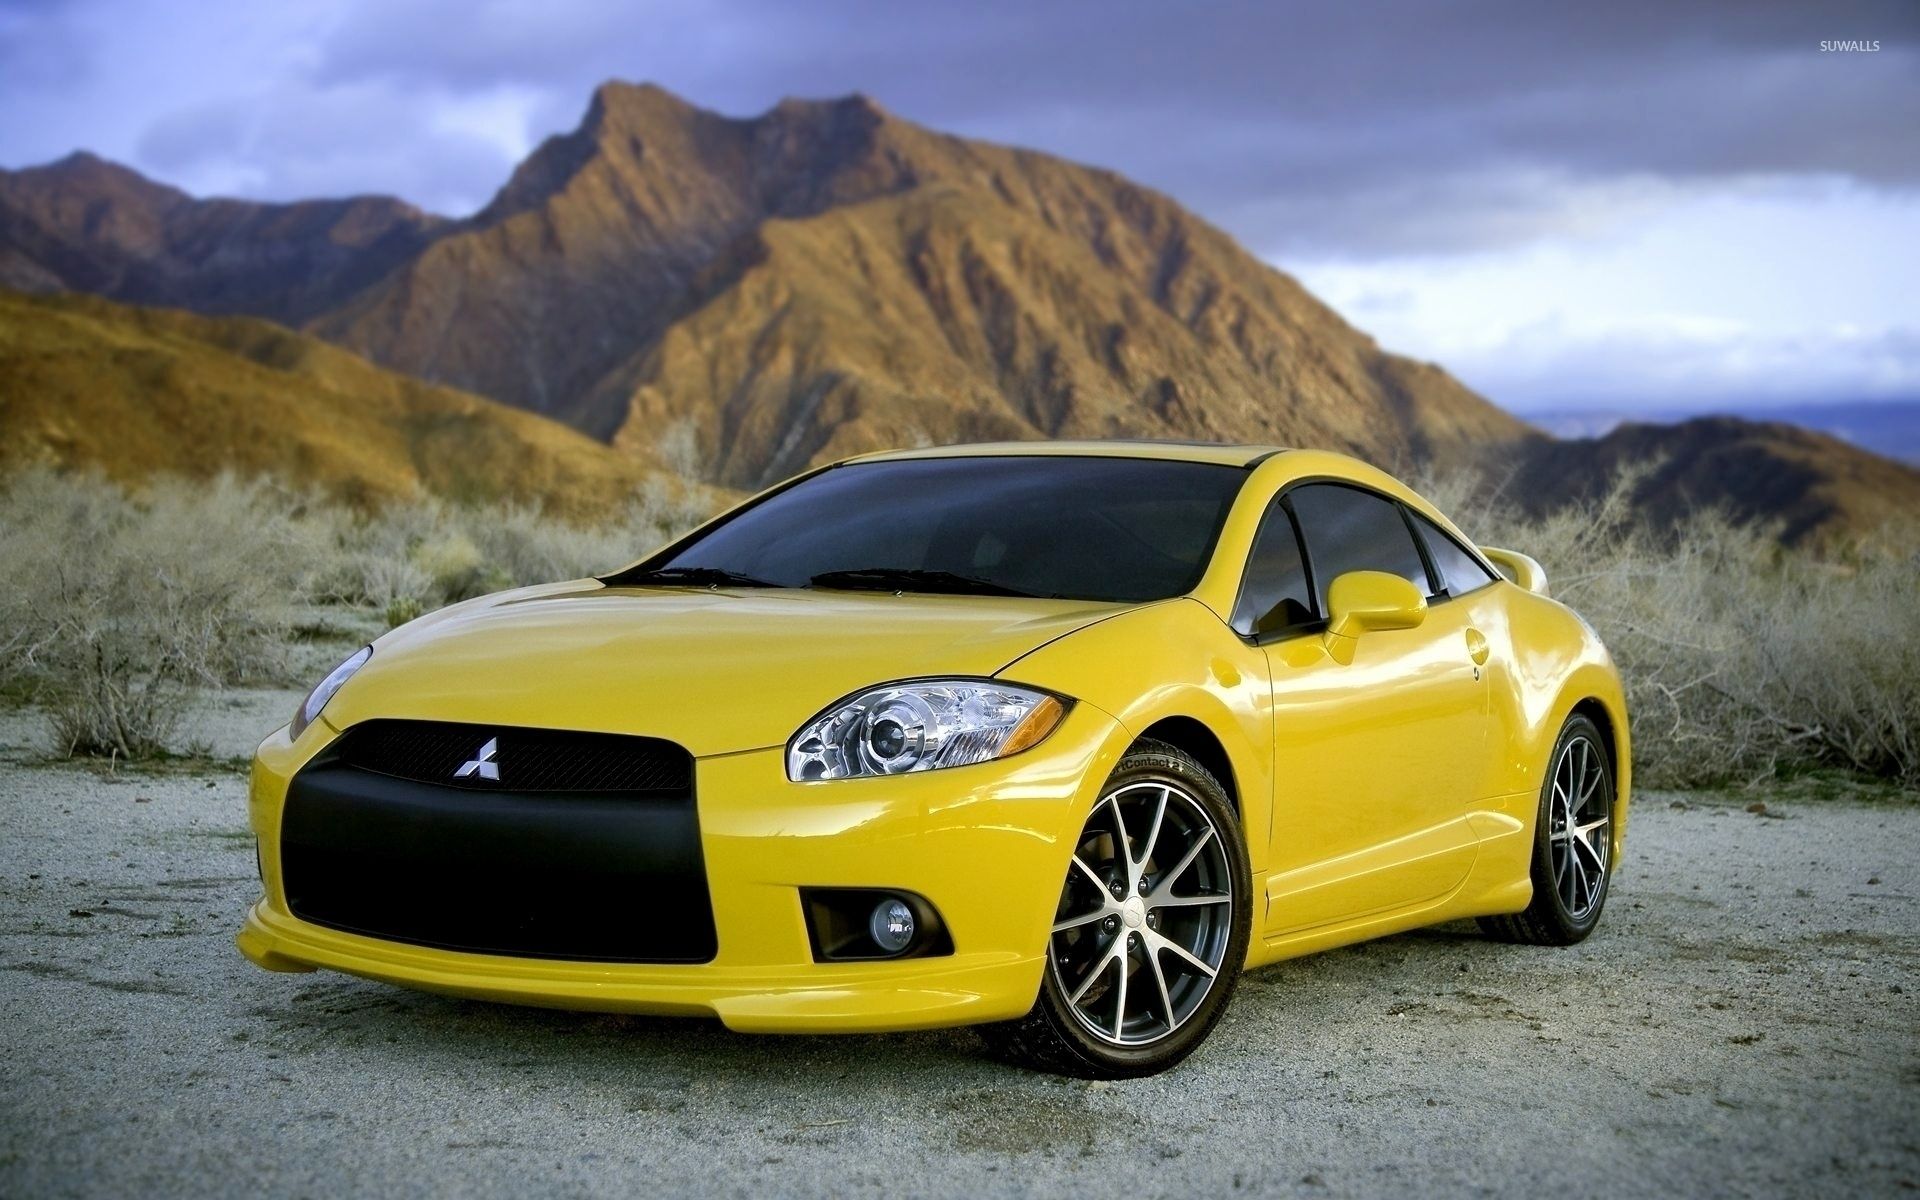 Front view of a yellow Mitsubishi Eclipse wallpaper wallpaper